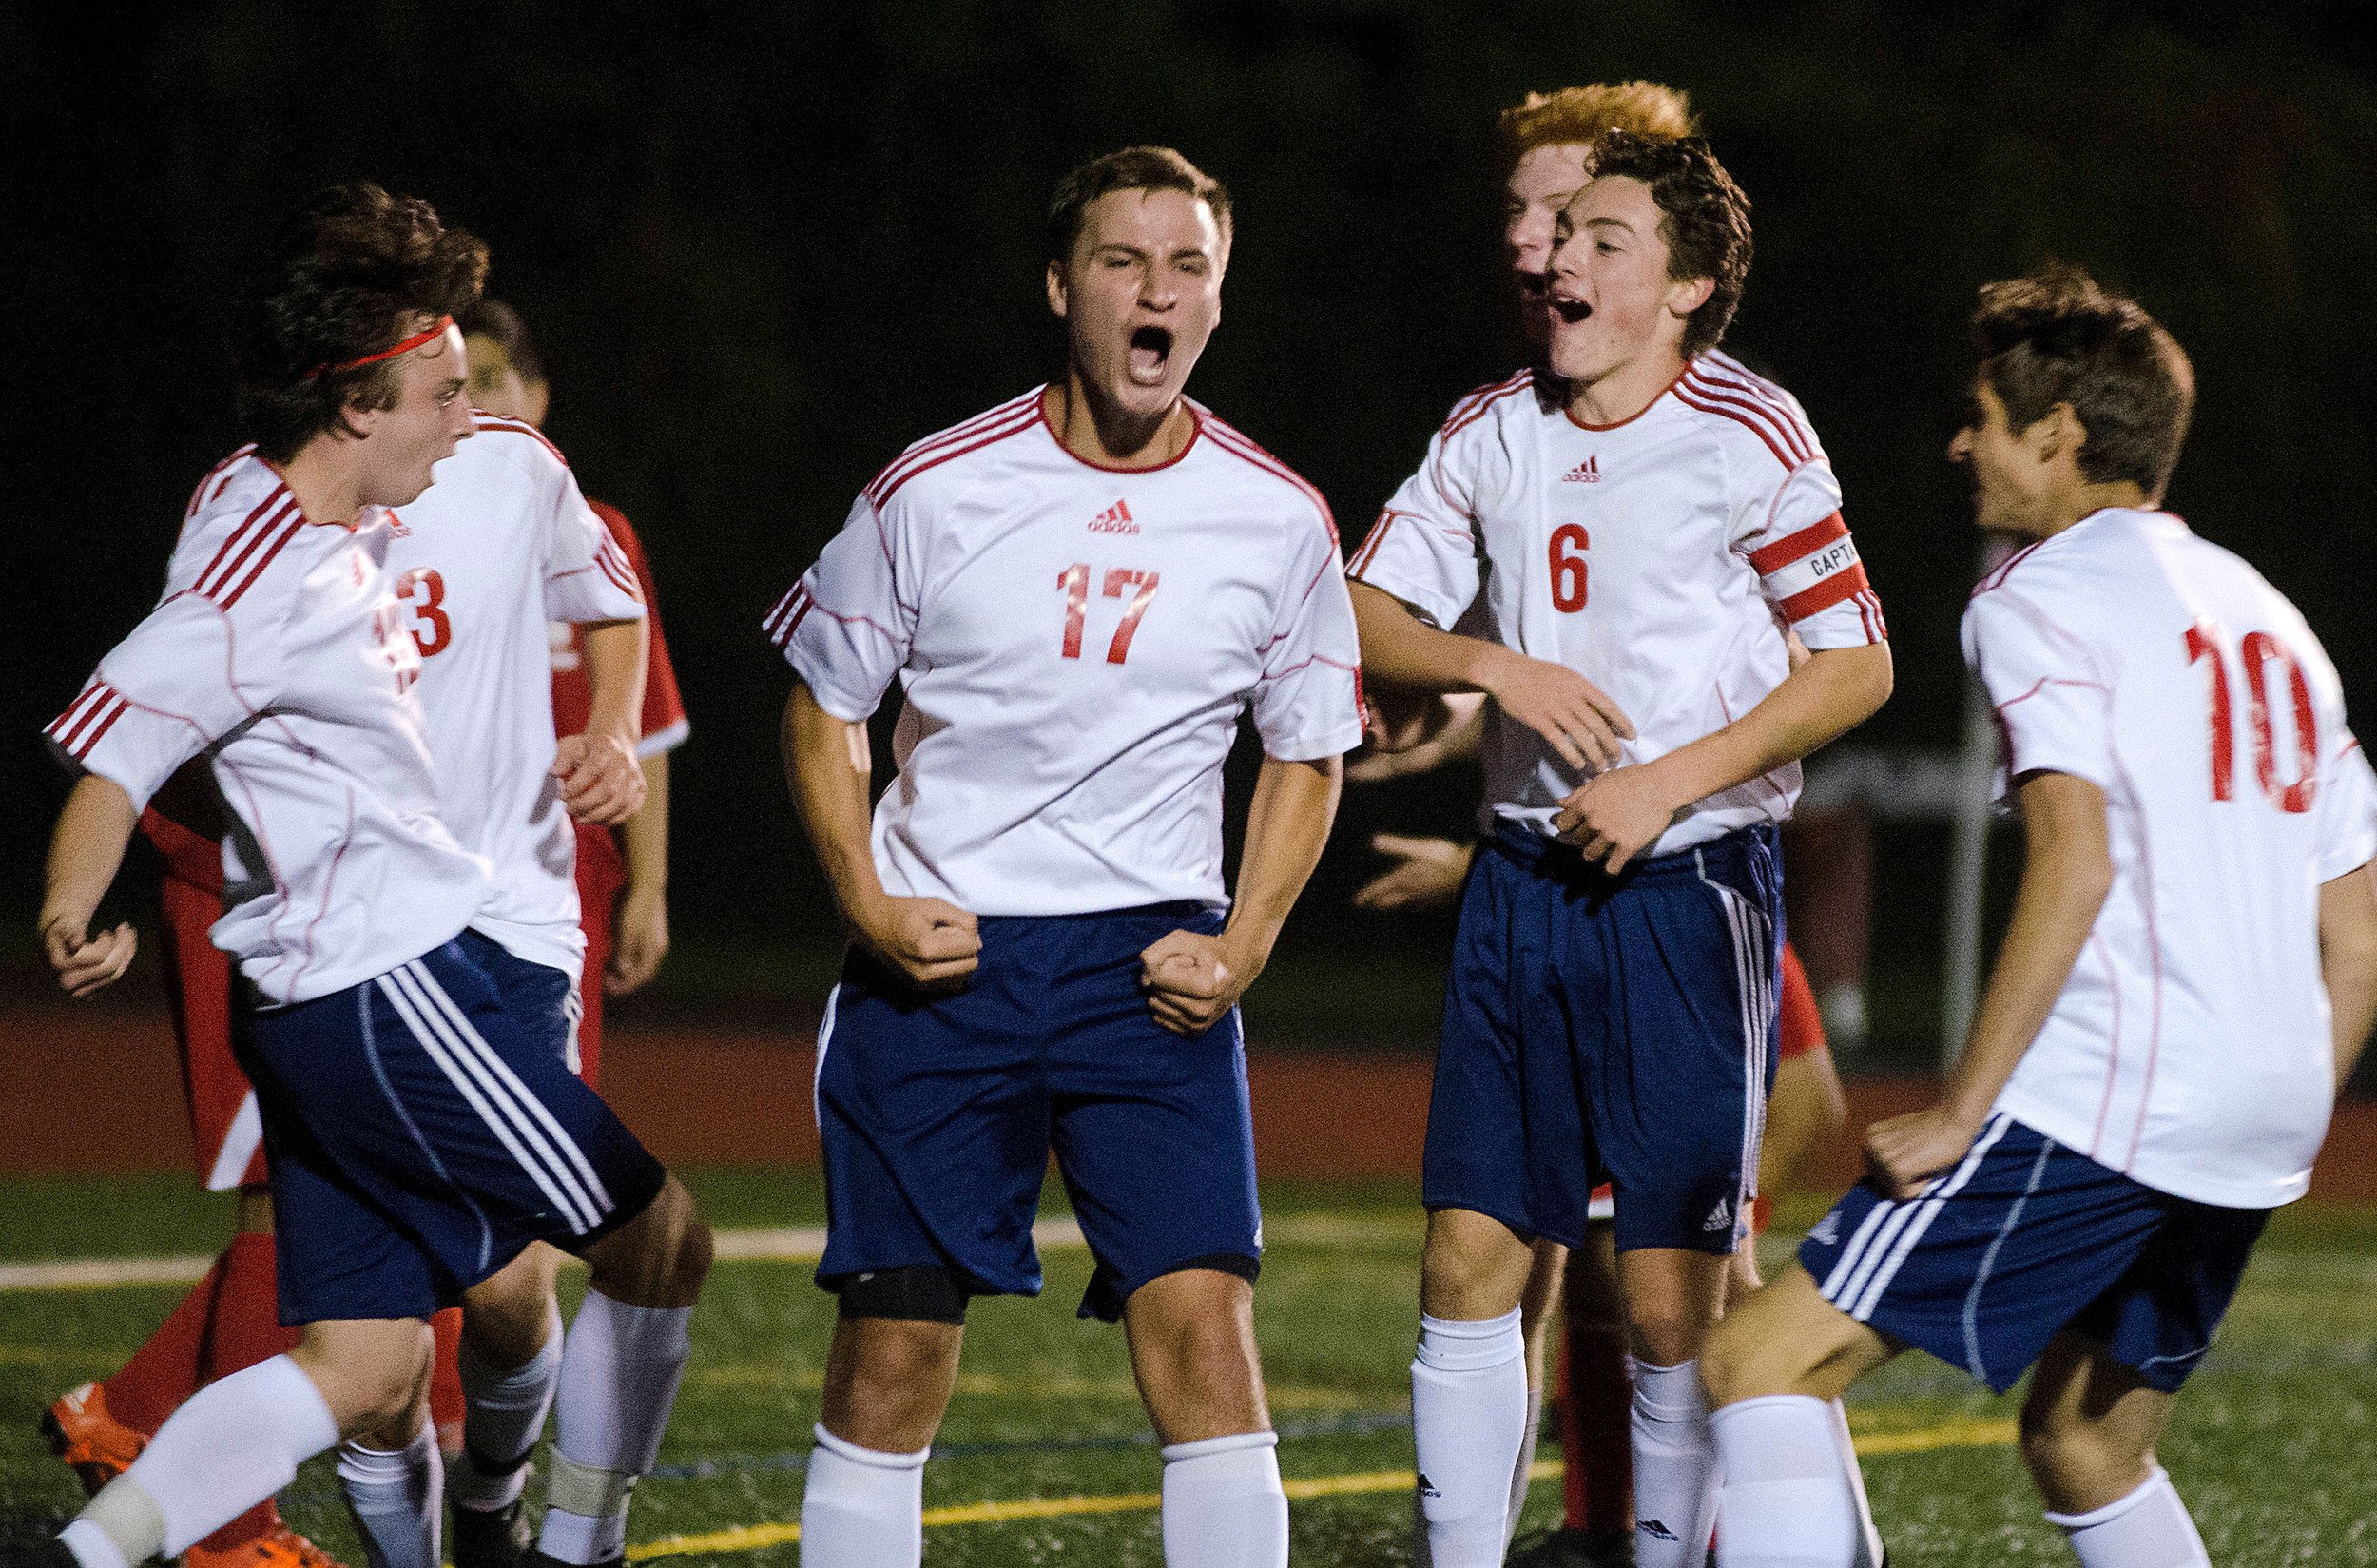 Cade McHugh (left) celebrates with Andrew Maiato (middle), John Cavanagh  and Chris Renault after he scored a header late in the game to give the Patriots a 1-0 lead.